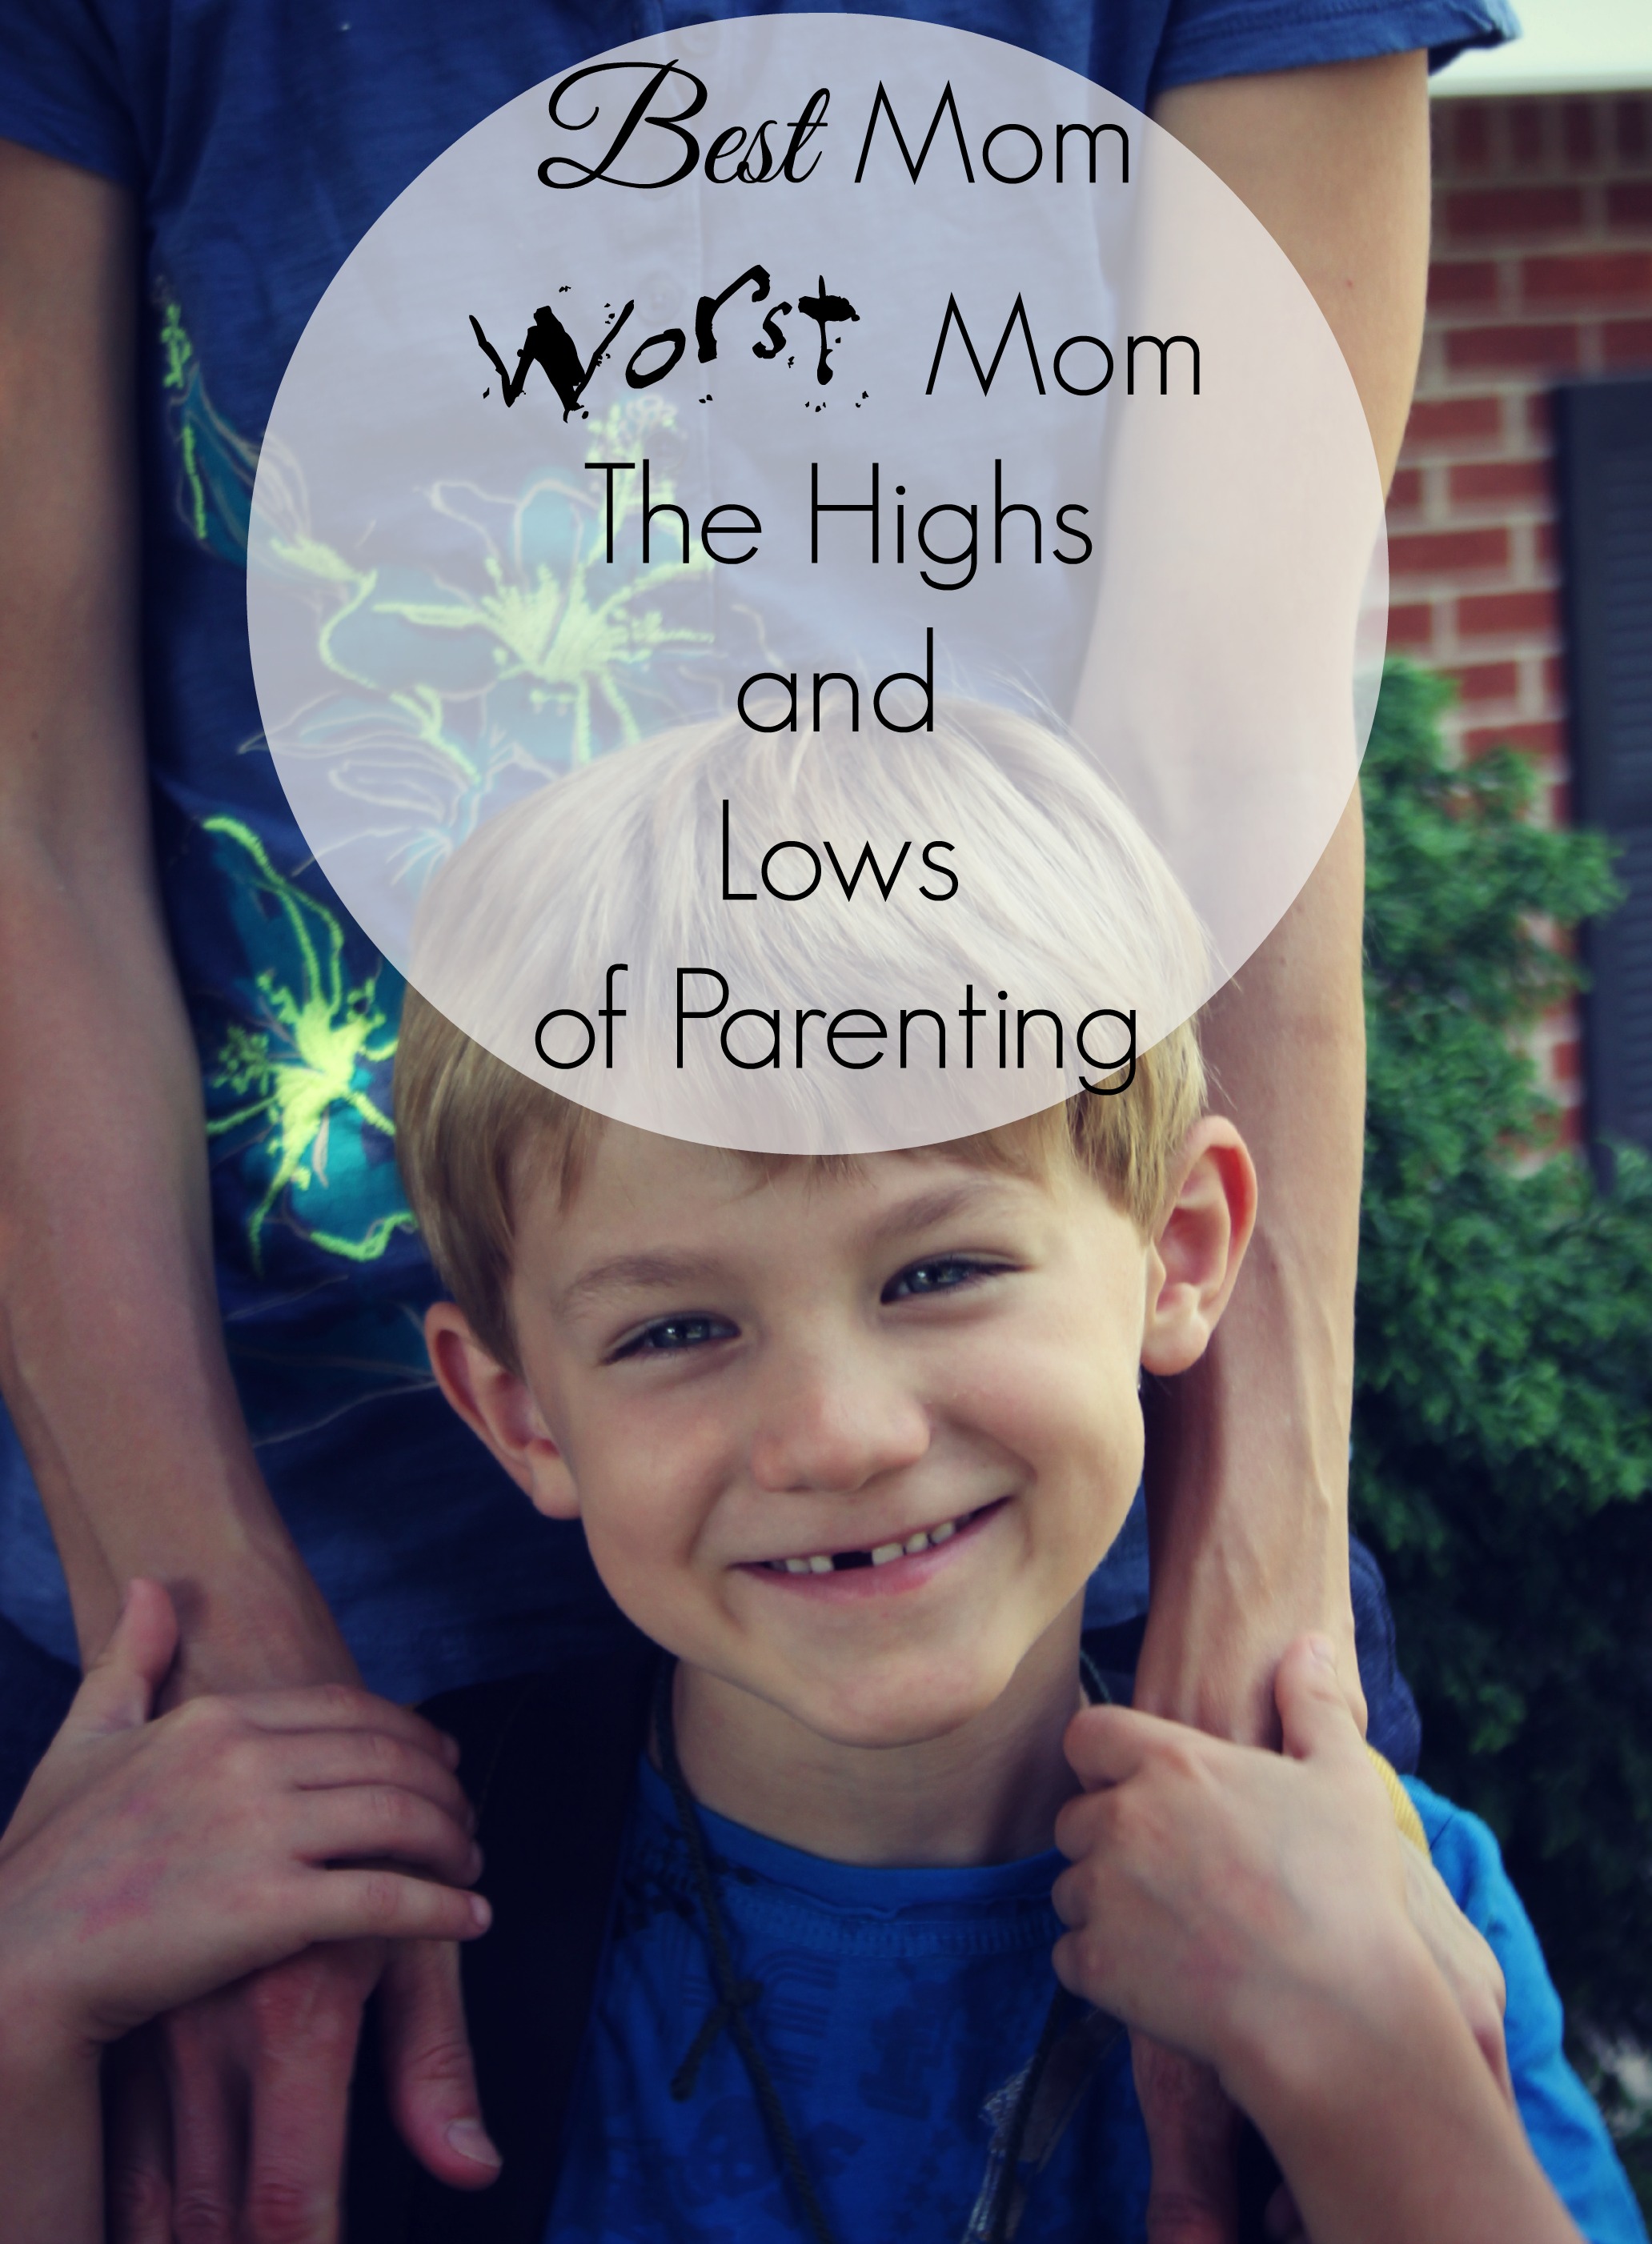 Best Mom – Worst Mom The Highs and Lows of Parenting